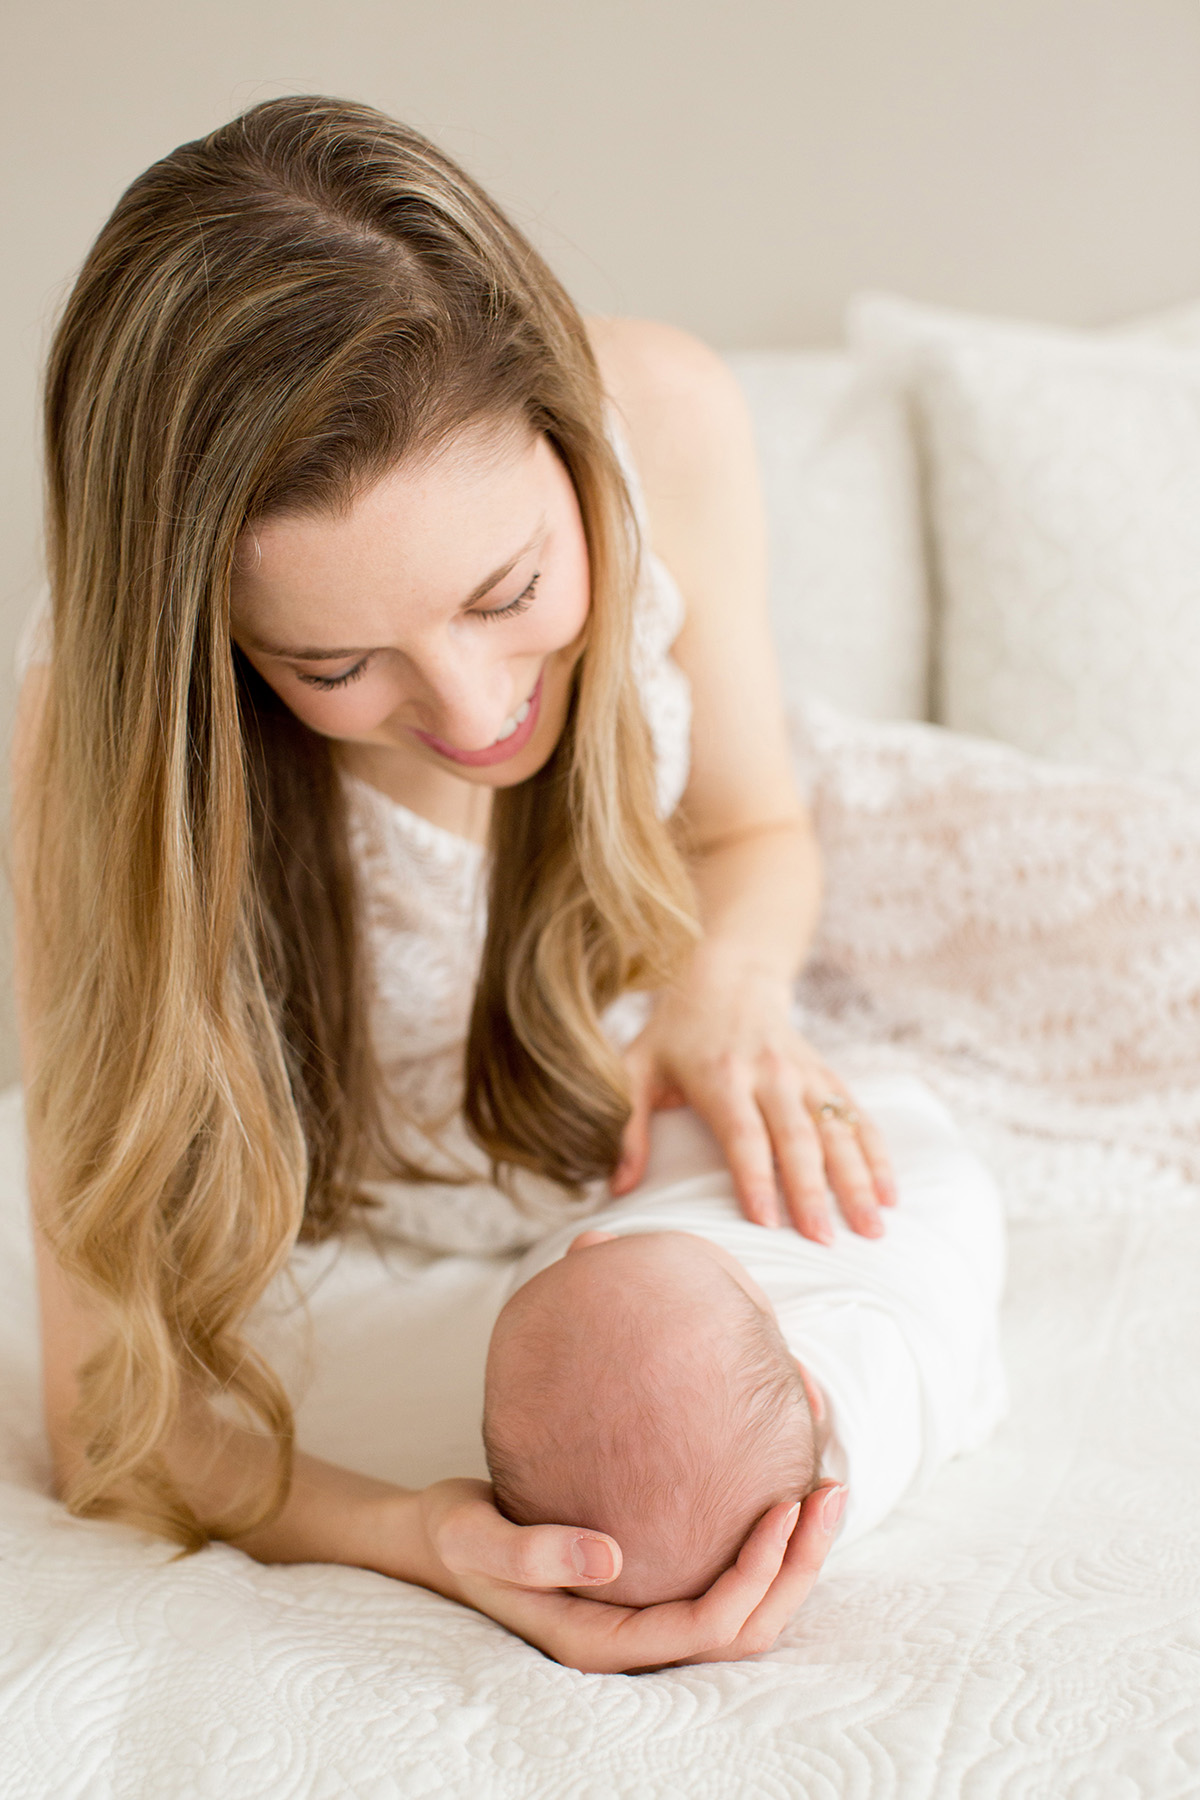 Louisville KY Newborn and Maternity Photographer | Julie Brock Photoraphy | Mom and baby on bed | Perfect Newborn Photo | Louisville Photographer.jpg